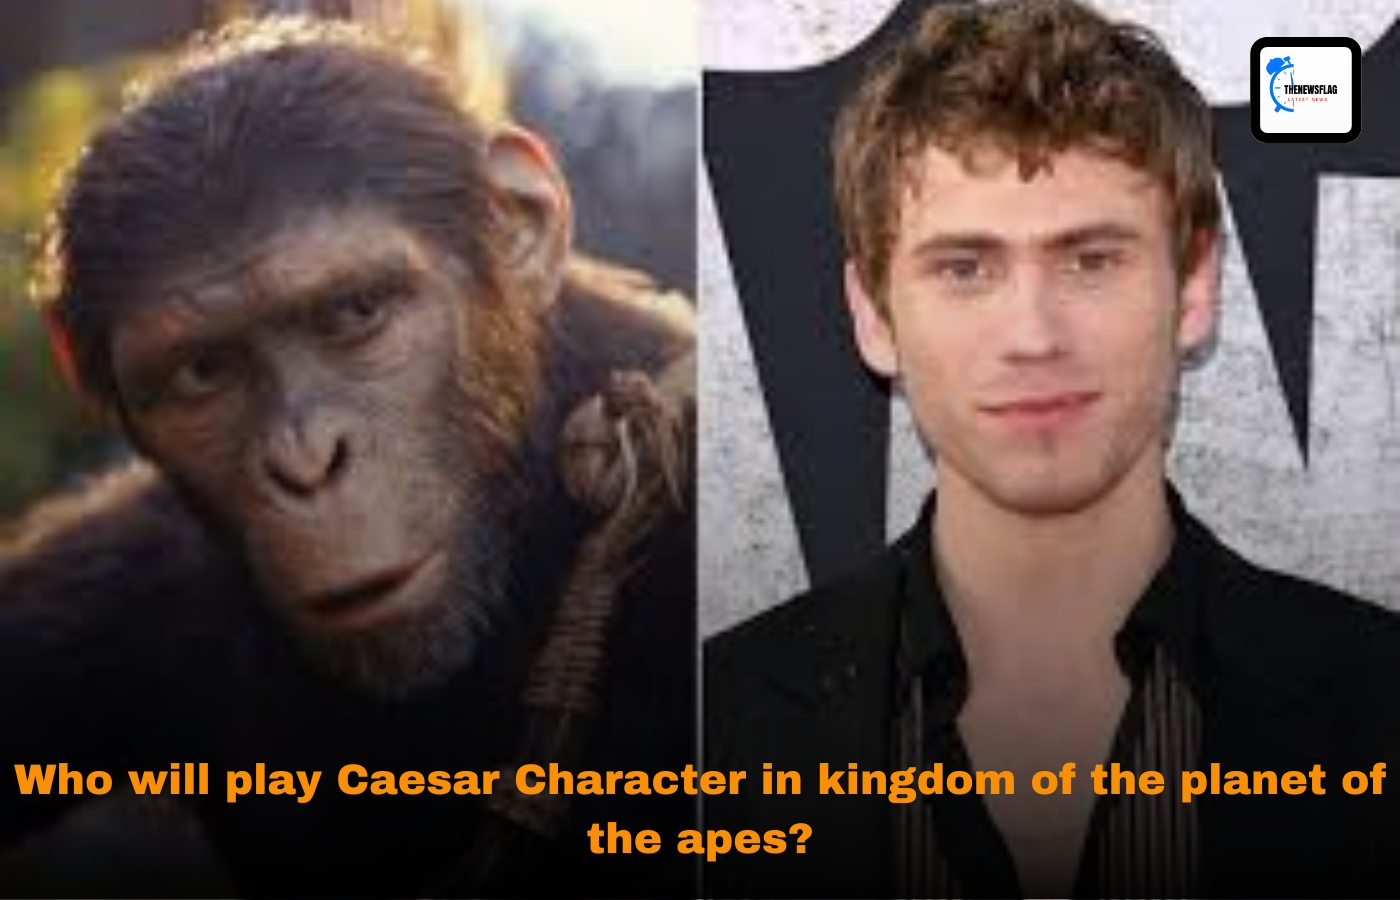 Who will play Caesar Character in kingdom of the planet of the apes?